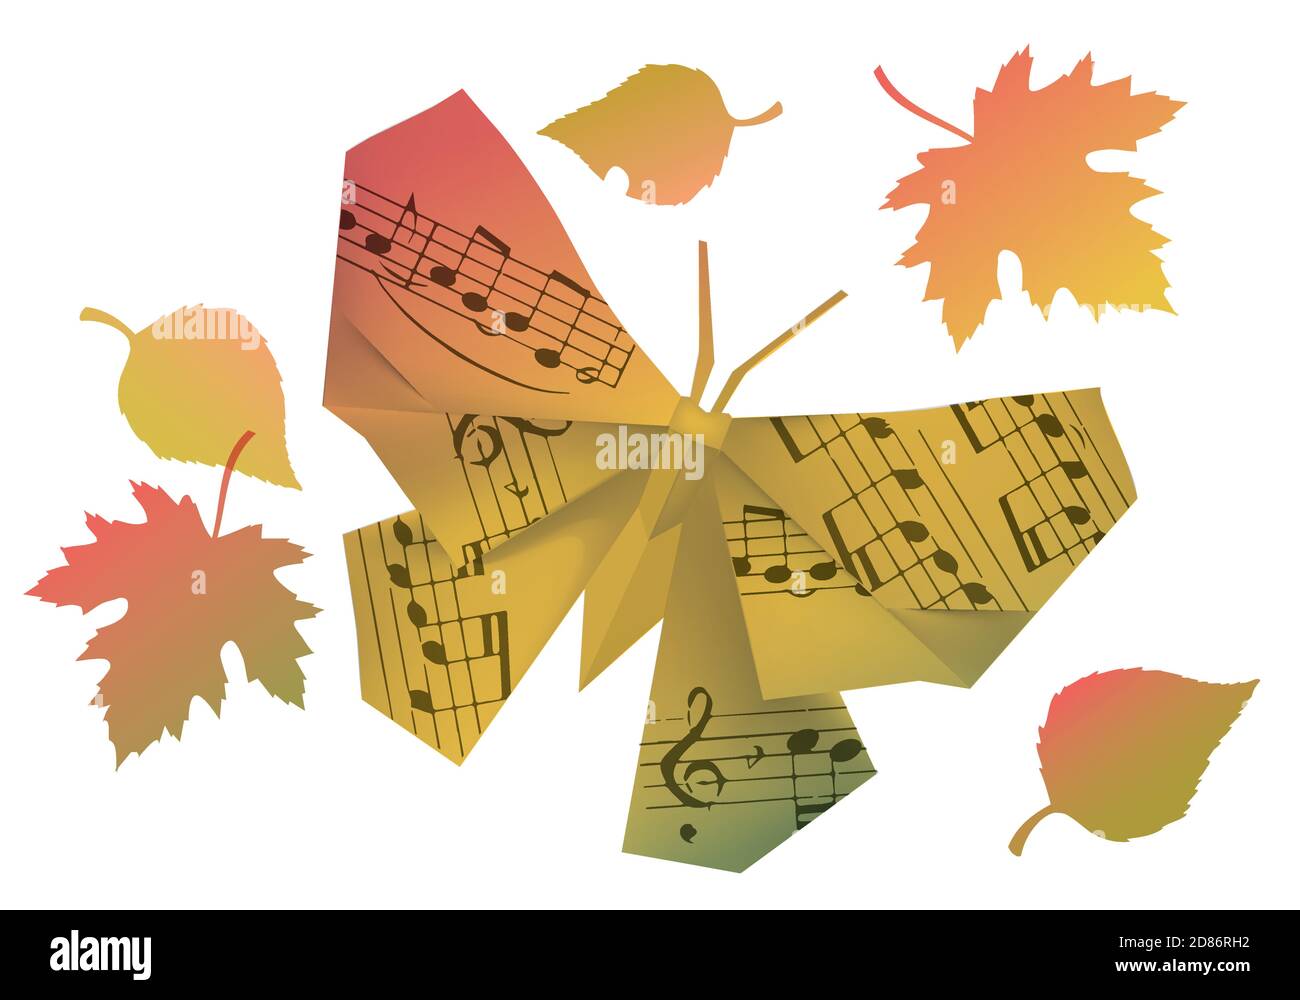 Origami butterfly with musical notes and autumn leaves.  Illustration of paper model of butterfly in autumn colors symbolizing autumn mood. Stock Vector